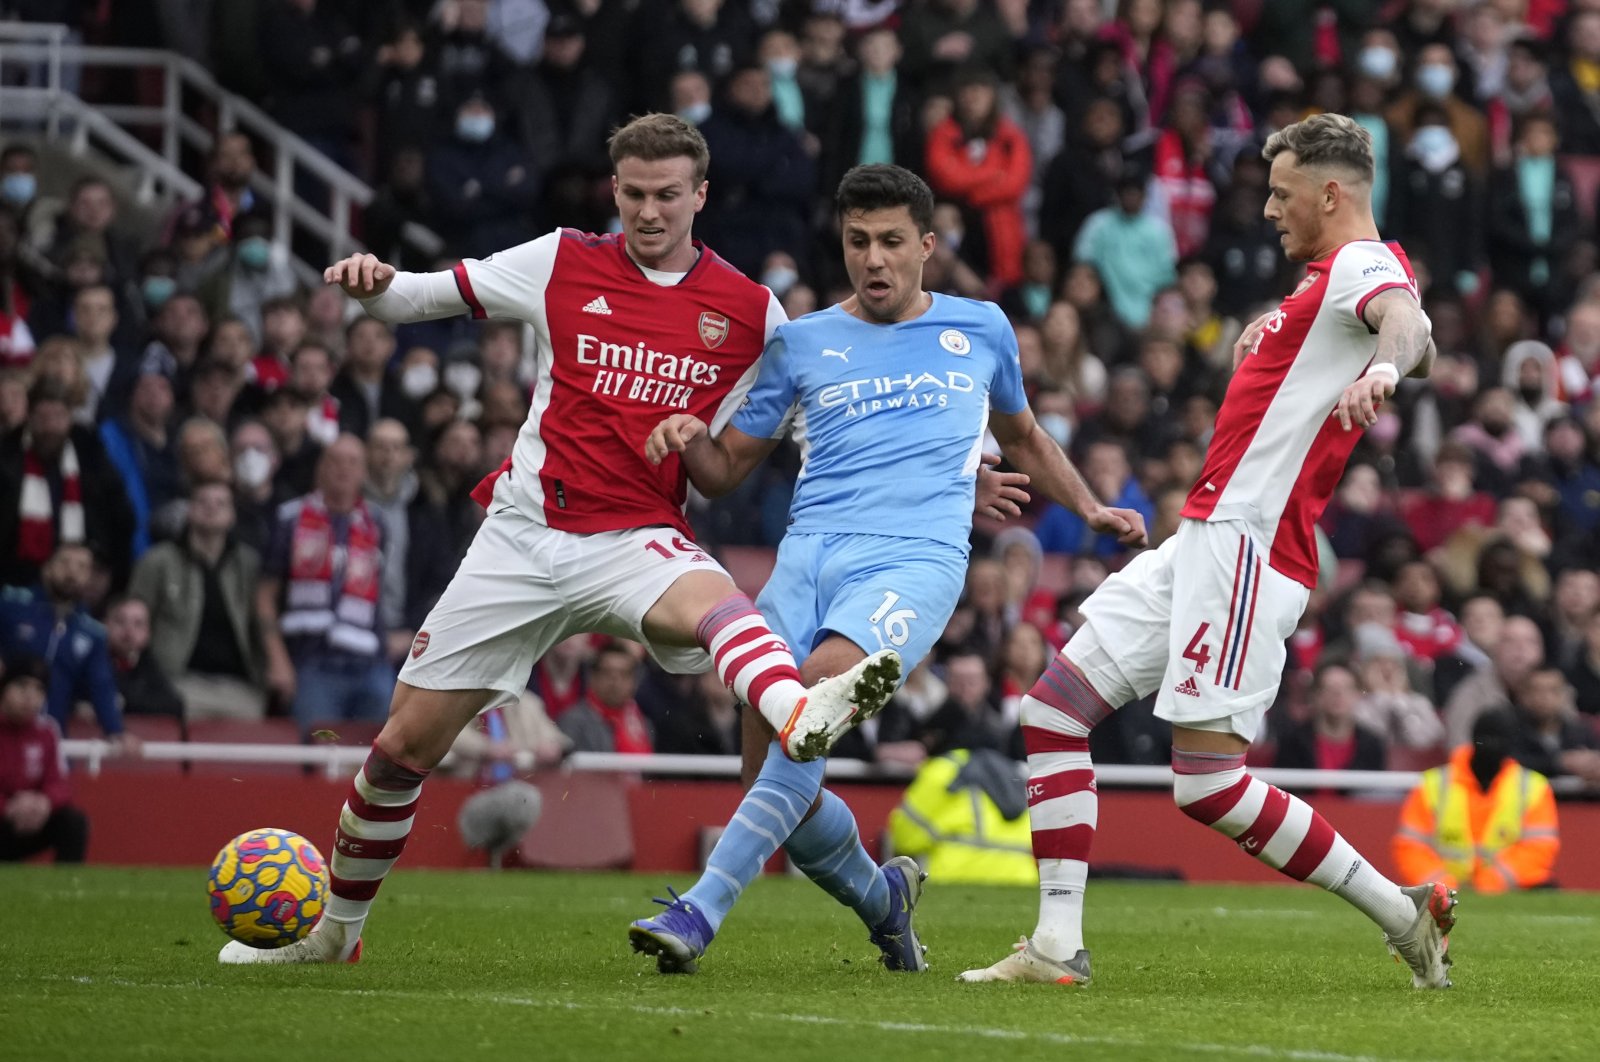 Manchester City&#039;s Rodrigo (C) shoots to score past Arsenal&#039;s Rob Holding (L) and Ben White during a Premier League match at the Emirates Stadium, London, England, Jan. 1, 2022. (AP Photo)